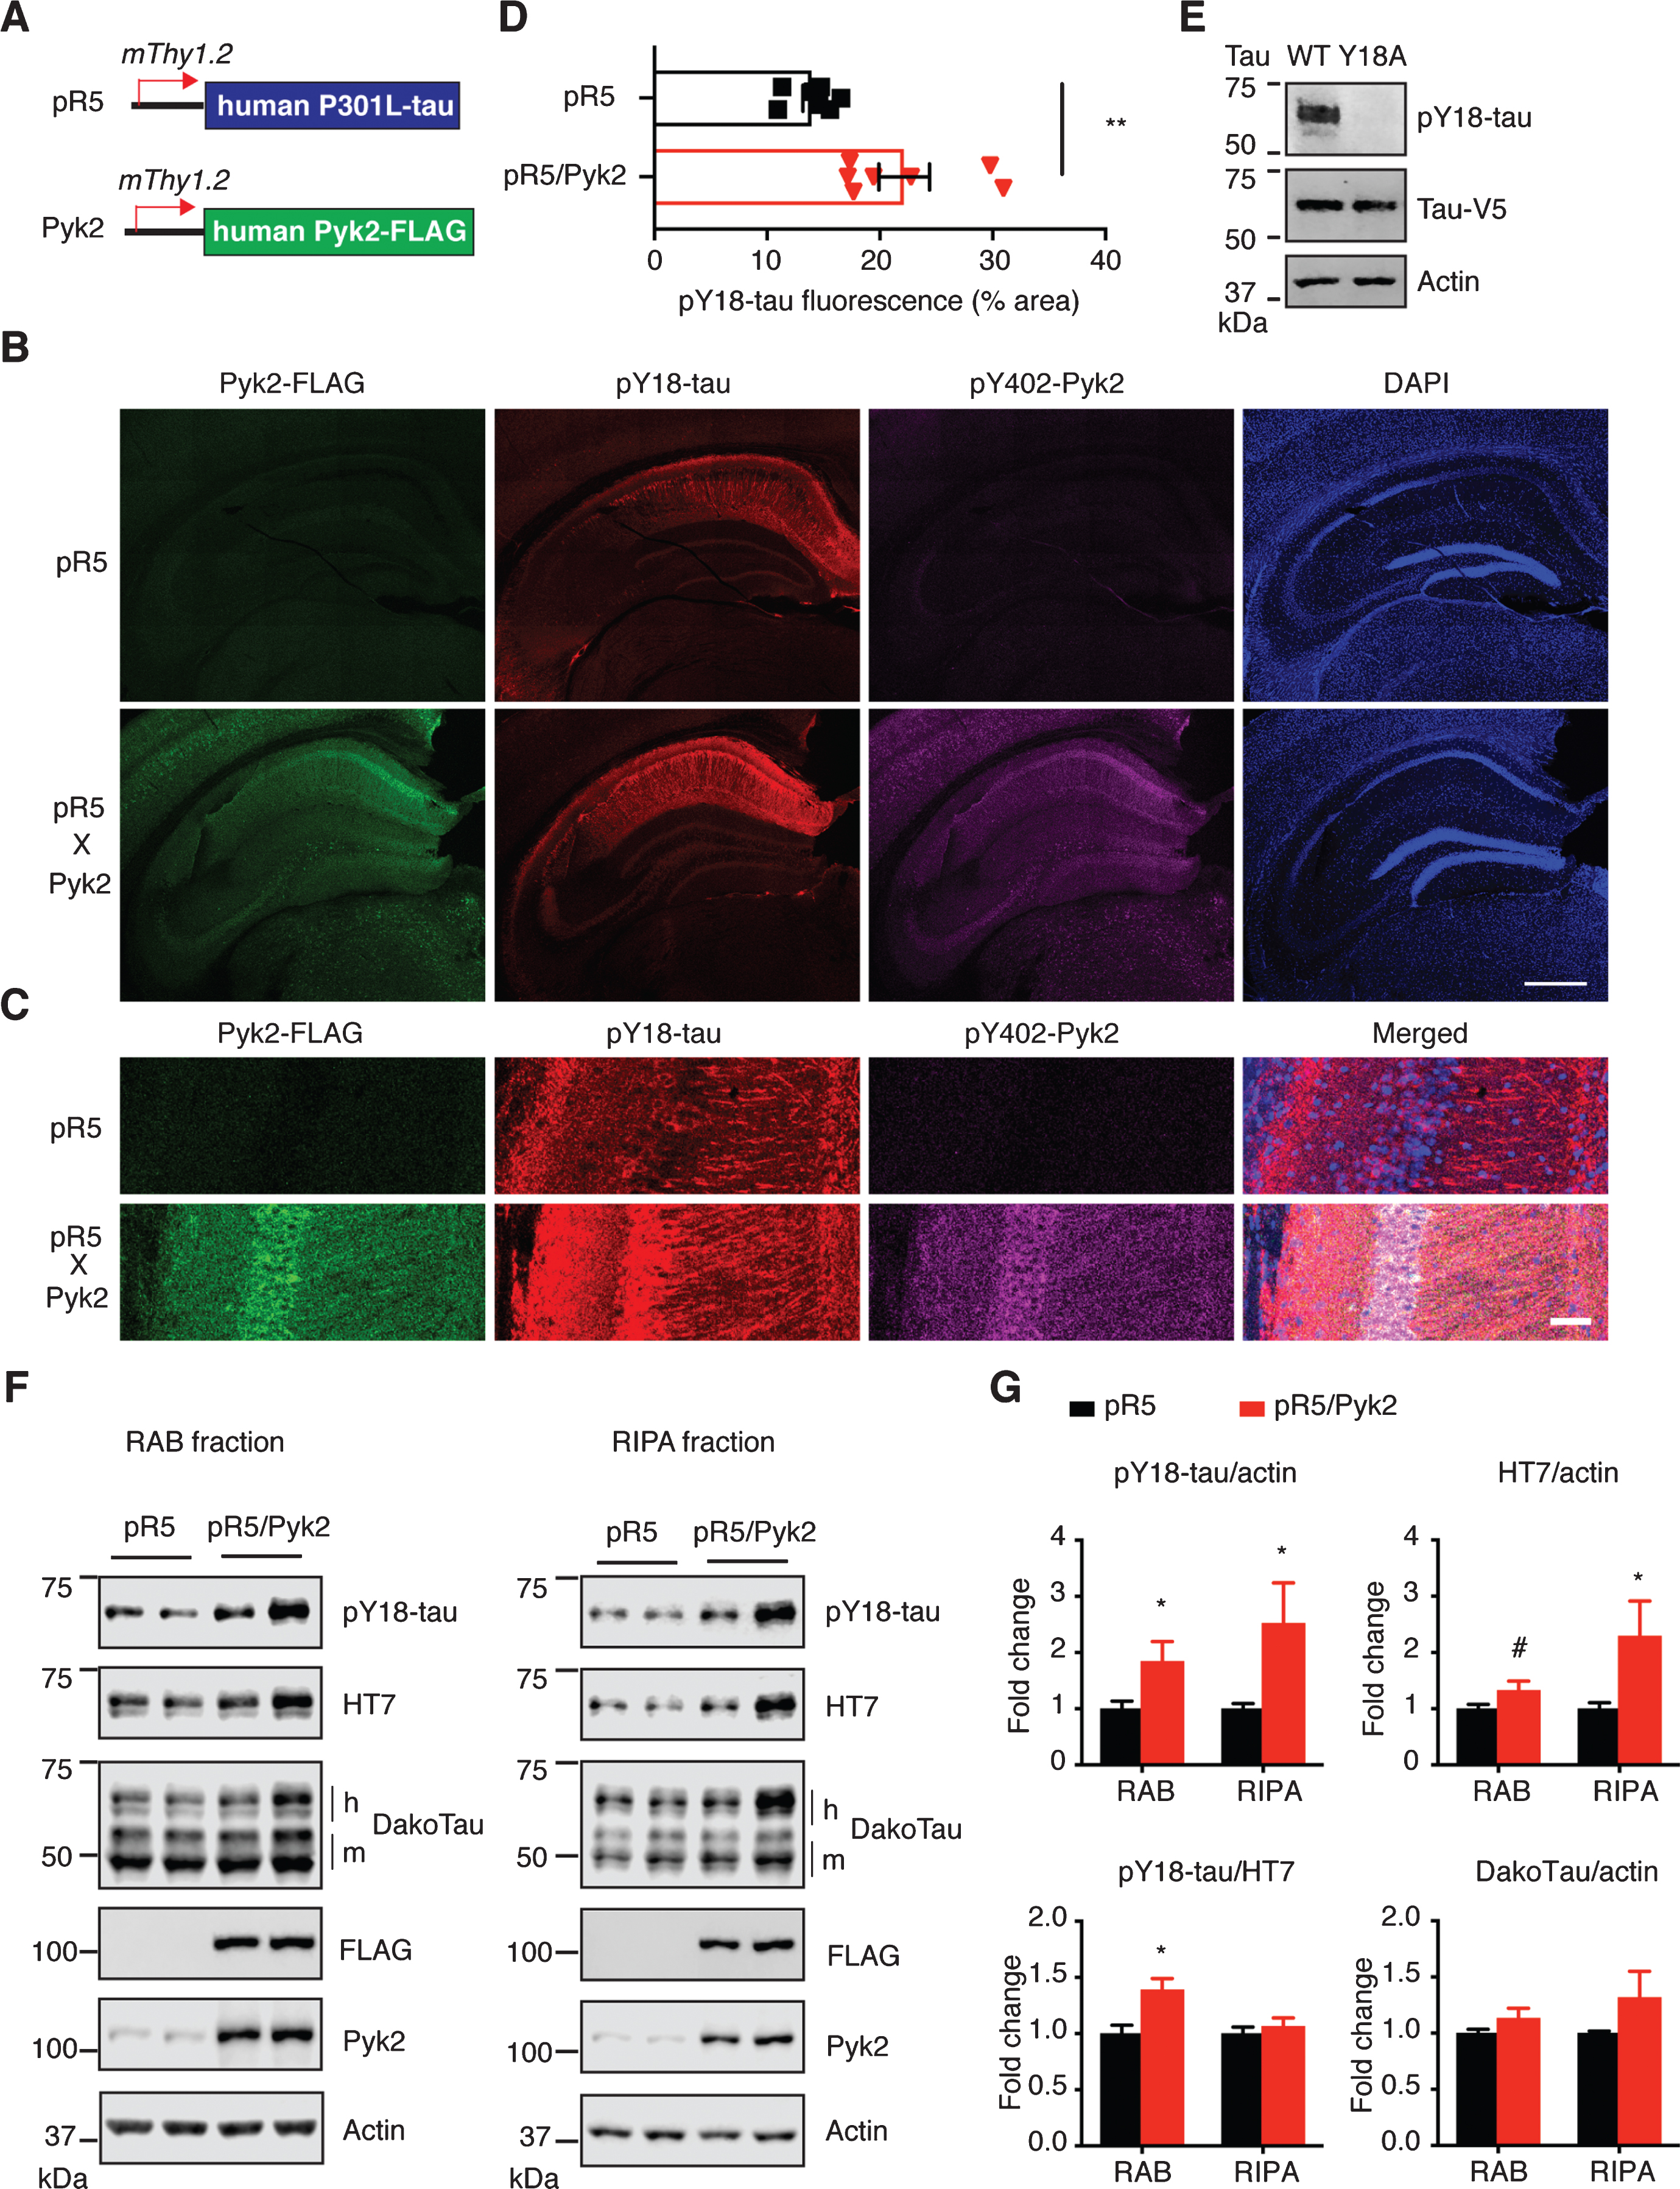 Pyk2 enhances tau pathology in vivo. A) The murine Thy1.2 promoter drives human P301L tau and FLAG-tagged Pyk2 expression in pR5 and Pyk2 transgenic mice, respectively. Representative immunofluorescence staining of brain sections from 12–15-month-old pR5 and double transgenic pR5/Pyk2 animals shown in (B) with magnified view in (C). Scale bars represent 500μm (B) and 50μm (C). D) Quantification of the pY18-tau positive area in the hippocampus of transgenic brains. Mean±s.e.m, n = 7 mice per group, two-tailed t test, **p < 0.01. E) Validation of pY18-tau antibody using immunoblots of a lysate from human tau-expressing HEK cells. WT, wild-type; Y18A, tyrosine to alanine mutant. F) Representative immunoblots of sequentially (RAB/RIPA) fractionated hippocampal homogenates from 12–15-month-old pR5 and pR5/Pyk2 mice. Both pY18-tau and HT7 antibodies react with transgenic human tau but not endogenous mouse tau. ‘h’ indicates human transgenic tau, and ‘m’ indicates endogenous murine tau. G) Quantification of immunoblots in (F). Fold changes are relative to the pR5 group. Mean±s.e.m, n = 4–6 mice per group, two-tailed t test, #p = 0.075, *p < 0.05.